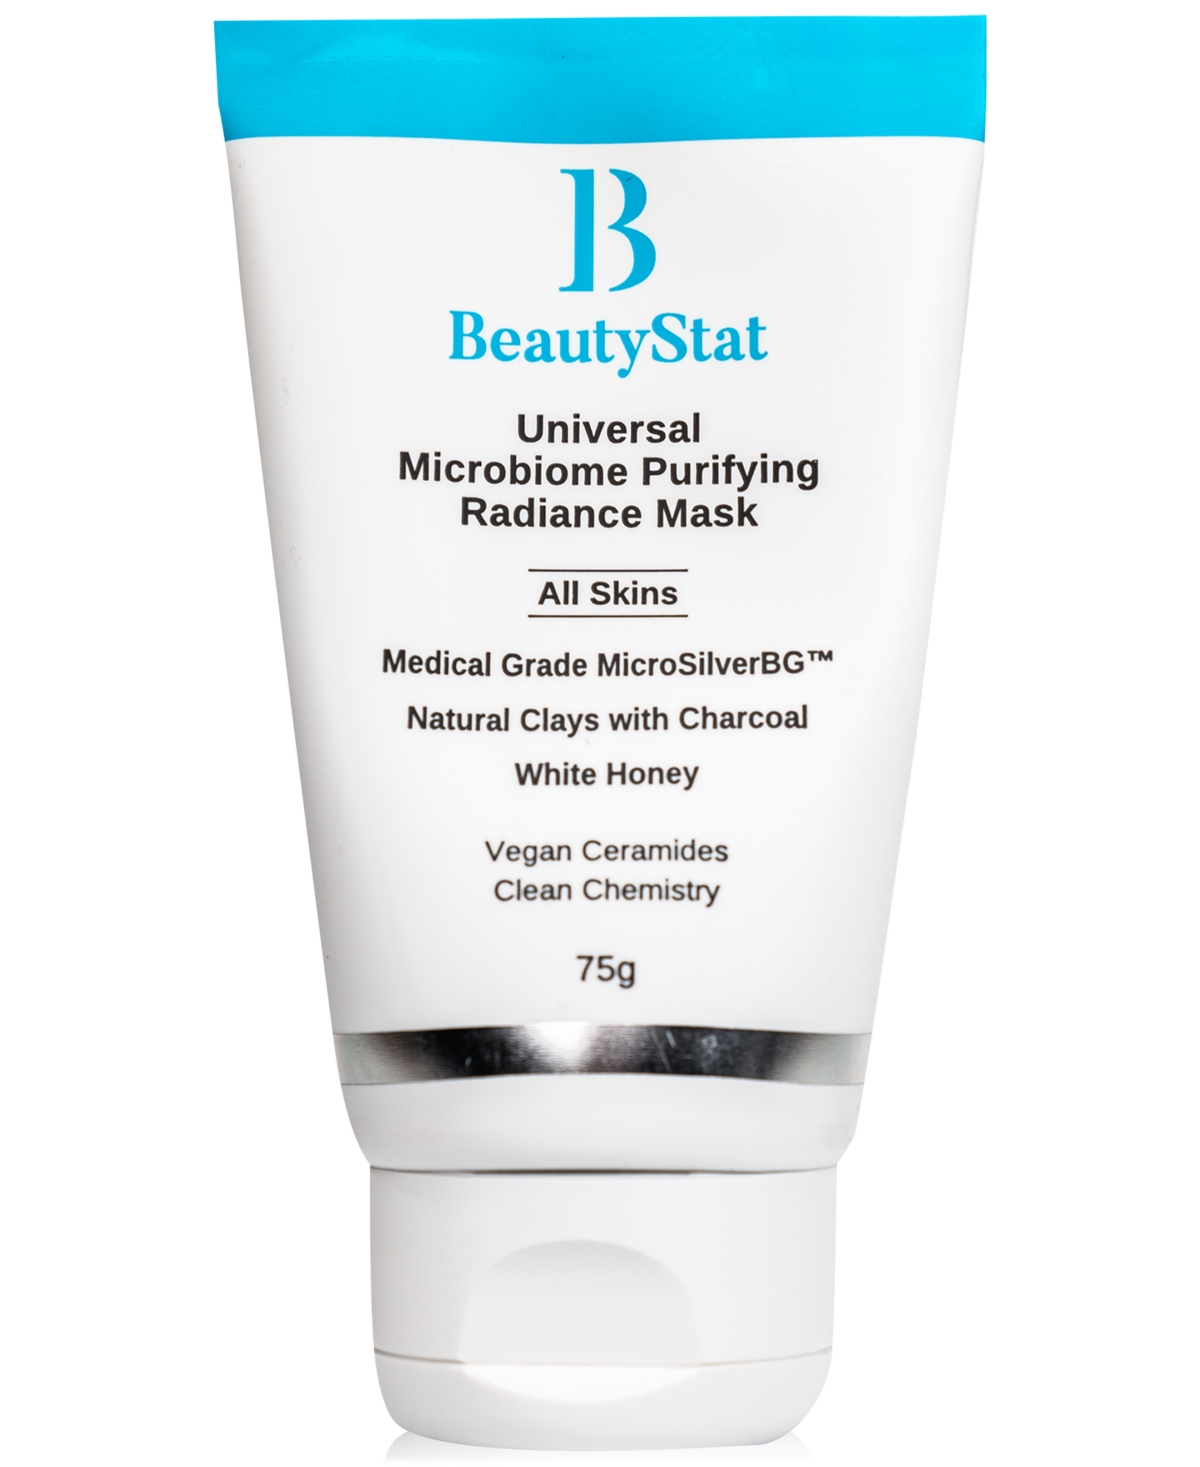 Beautystat Universal Microbiome Purifying Radiance Mask In No Color